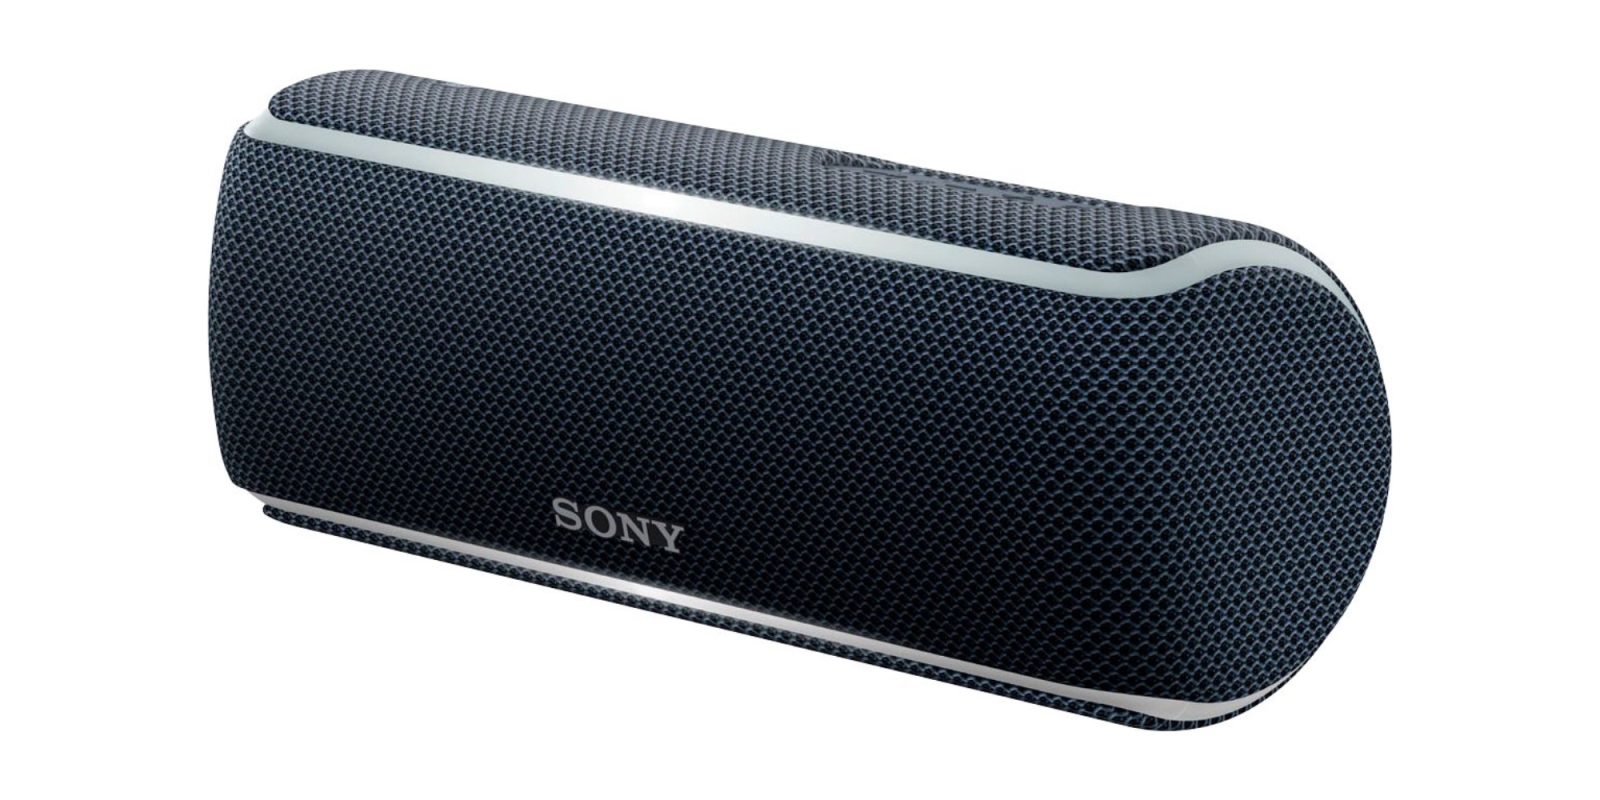 Sony’s 45 Bluetooth speaker packs LED lighting and can be yours at 55